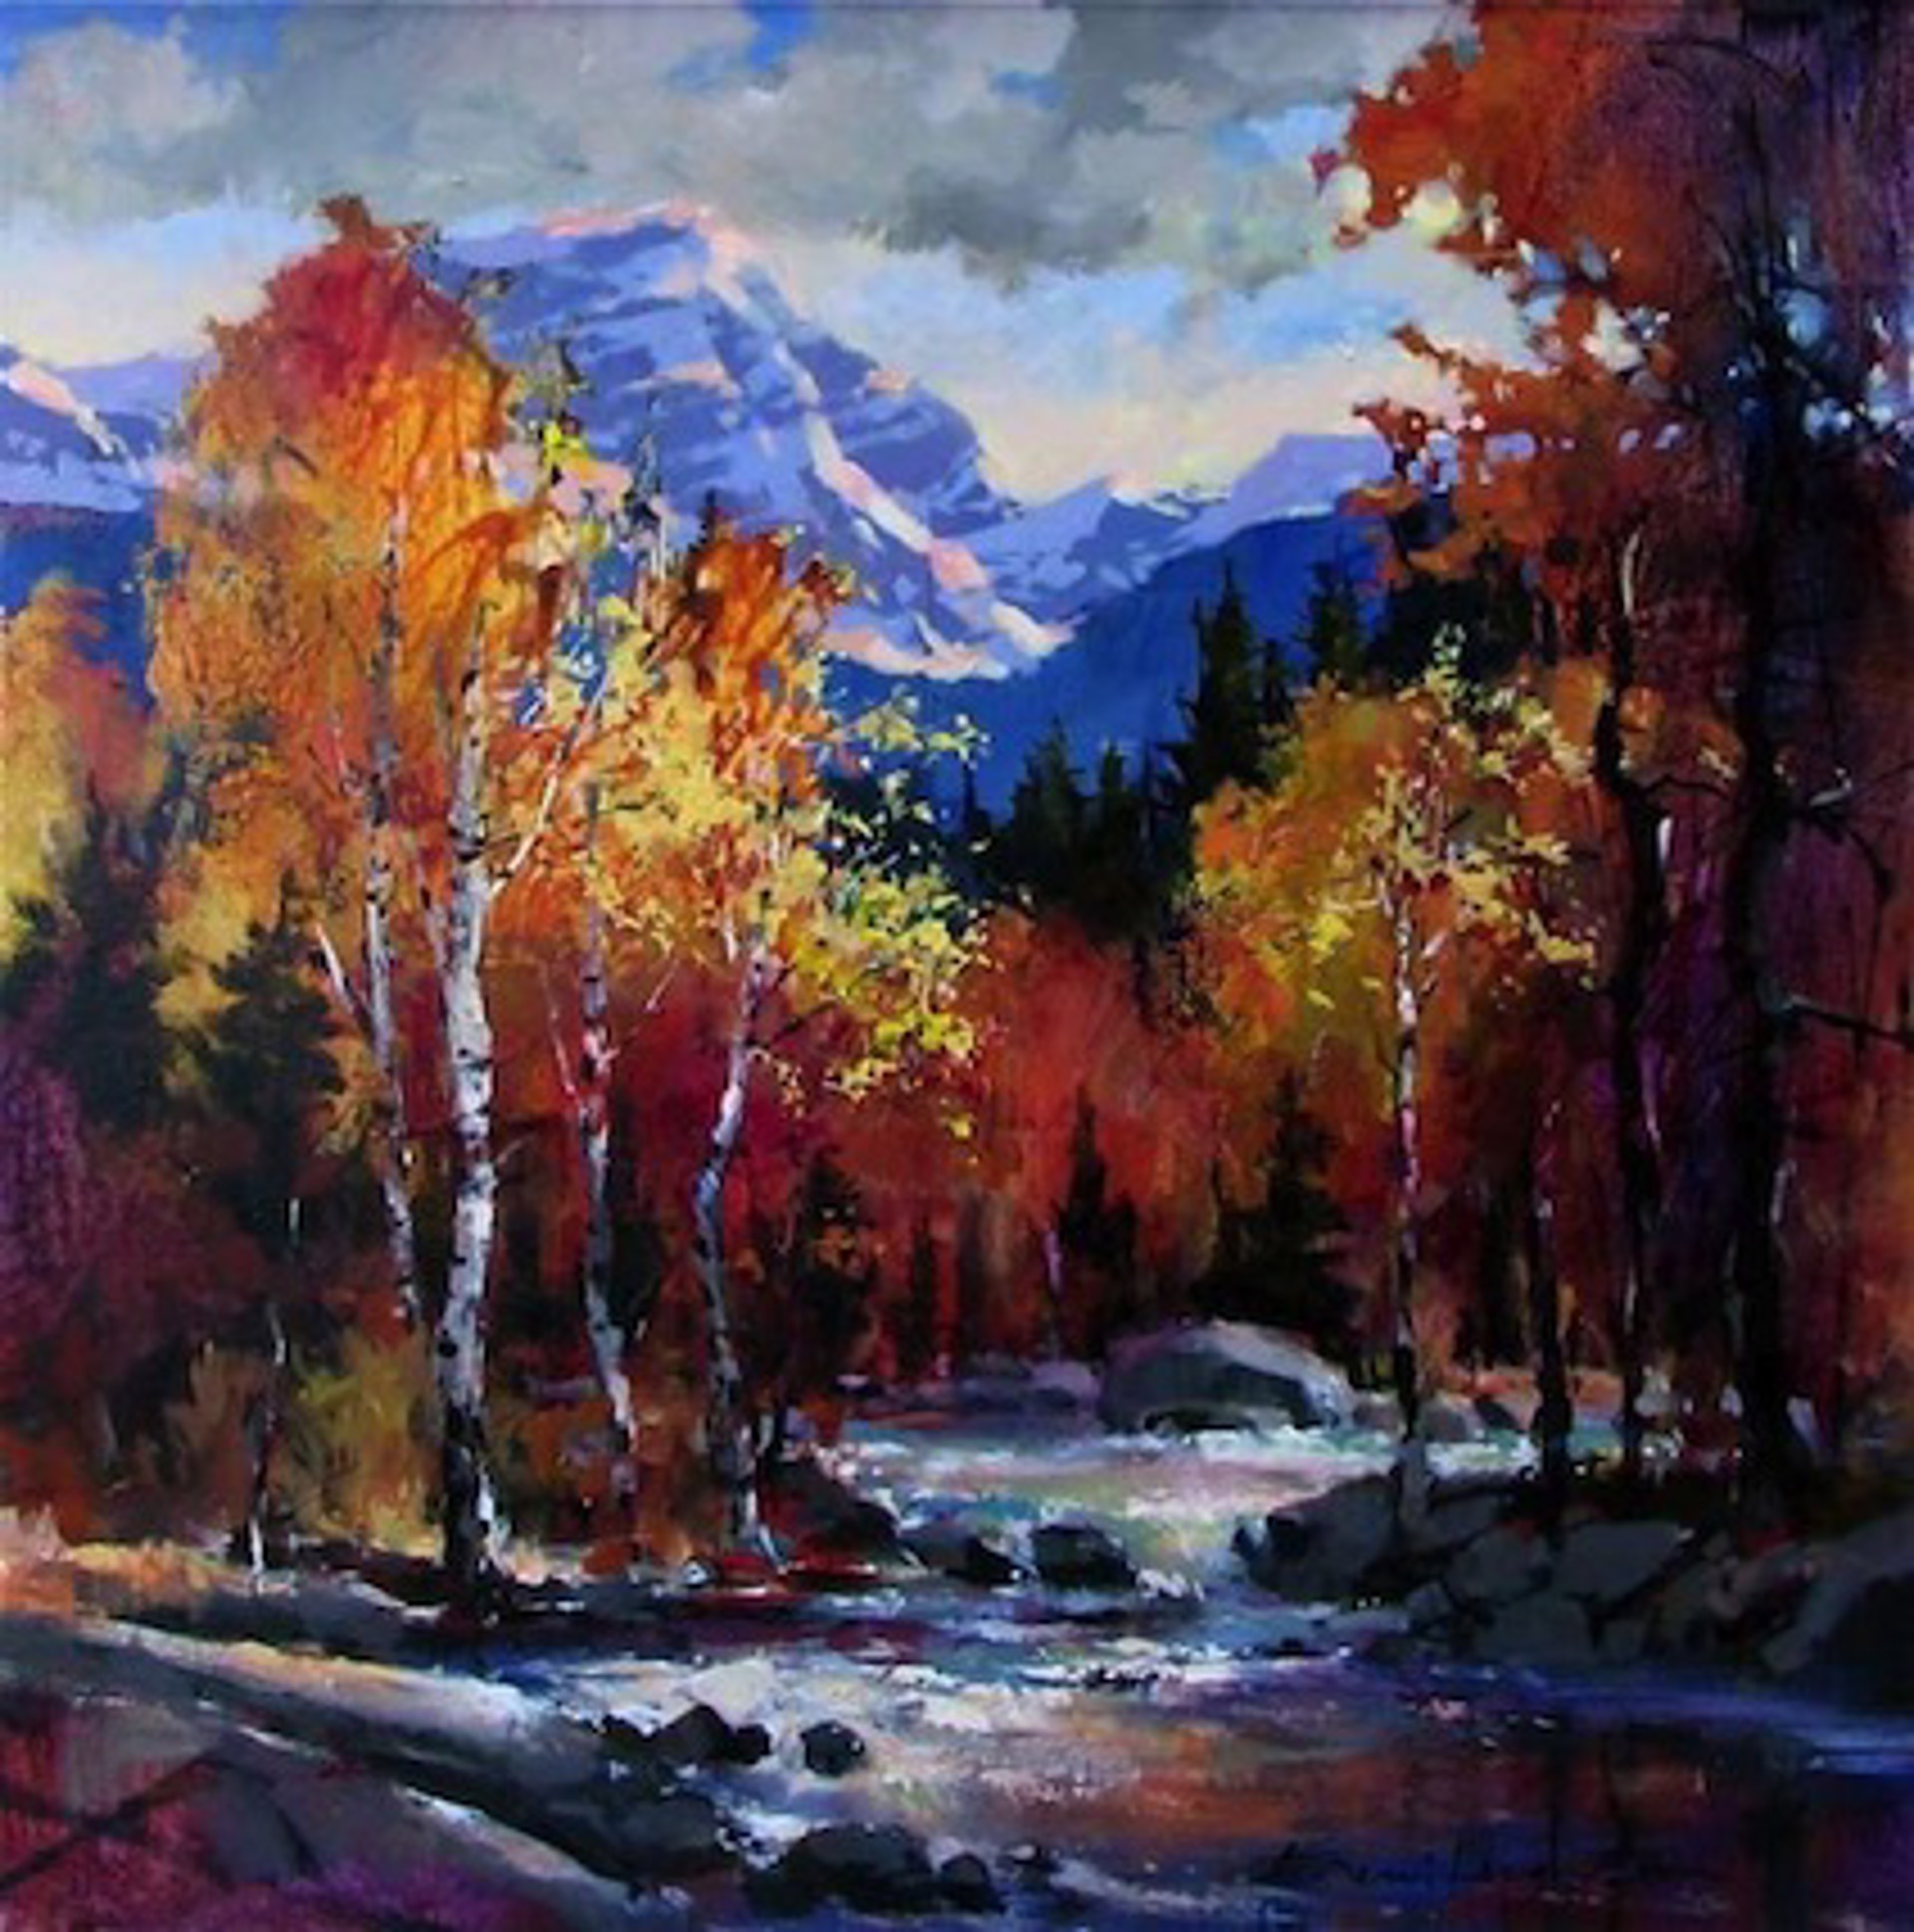 Below the Glacier by Brent Heighton